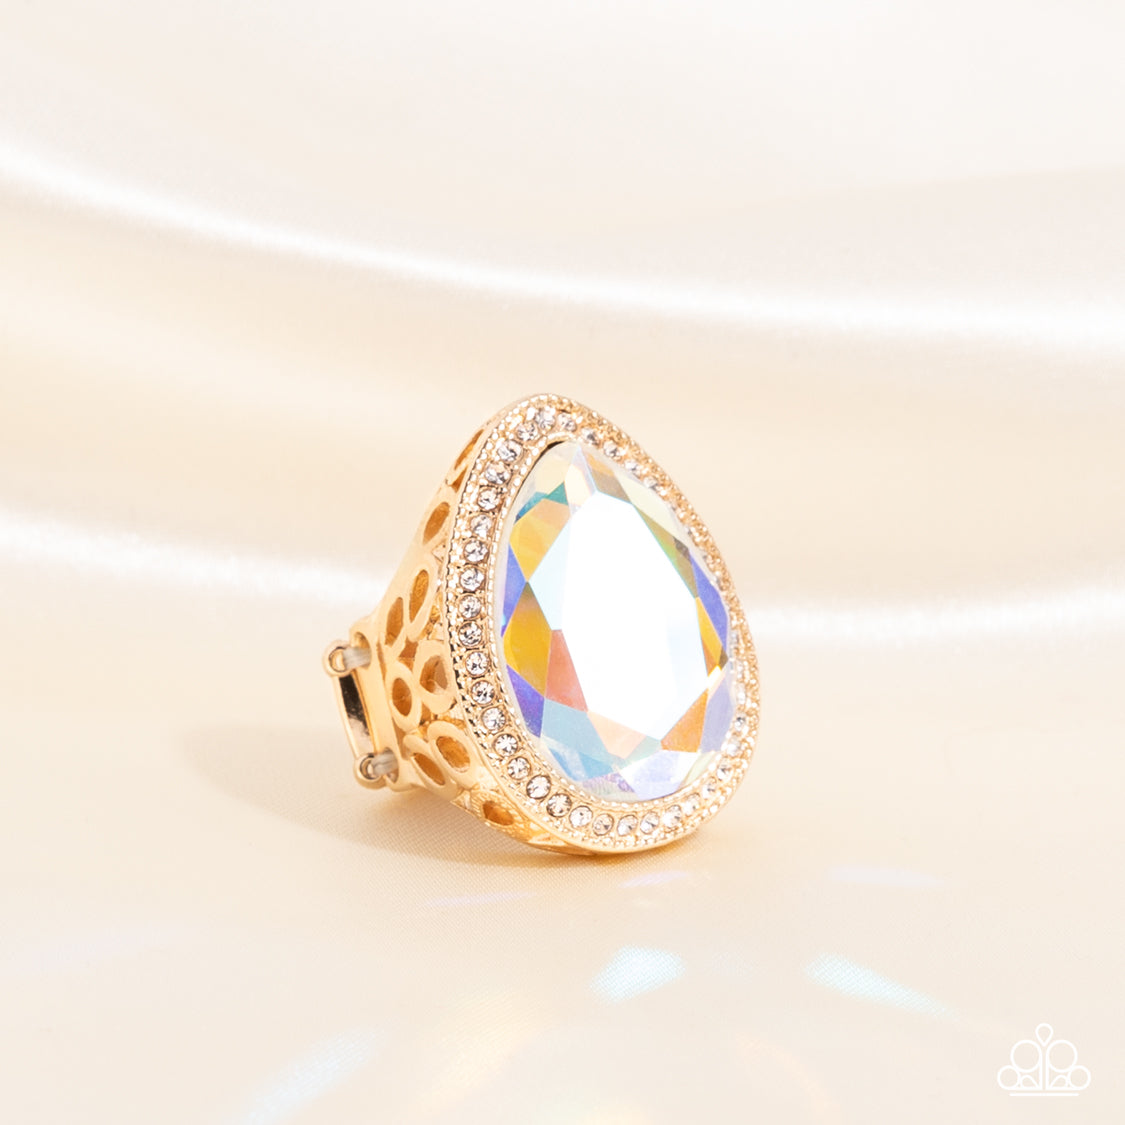 Illuminated Icon Gold Ring - Paparazzi Accessories  An oversized teardrop gem with an iridescent finish is nestled inside a gold teardrop frame encrusted in dainty white rhinestones. Airy teardrop cutouts decorate each side of the oversized frame### some with subtle texture and others with a high sheen finish. Features a stretchy band for a flexible fit. Due to its prismatic palette### color may vary.  Sold as one individual ring.